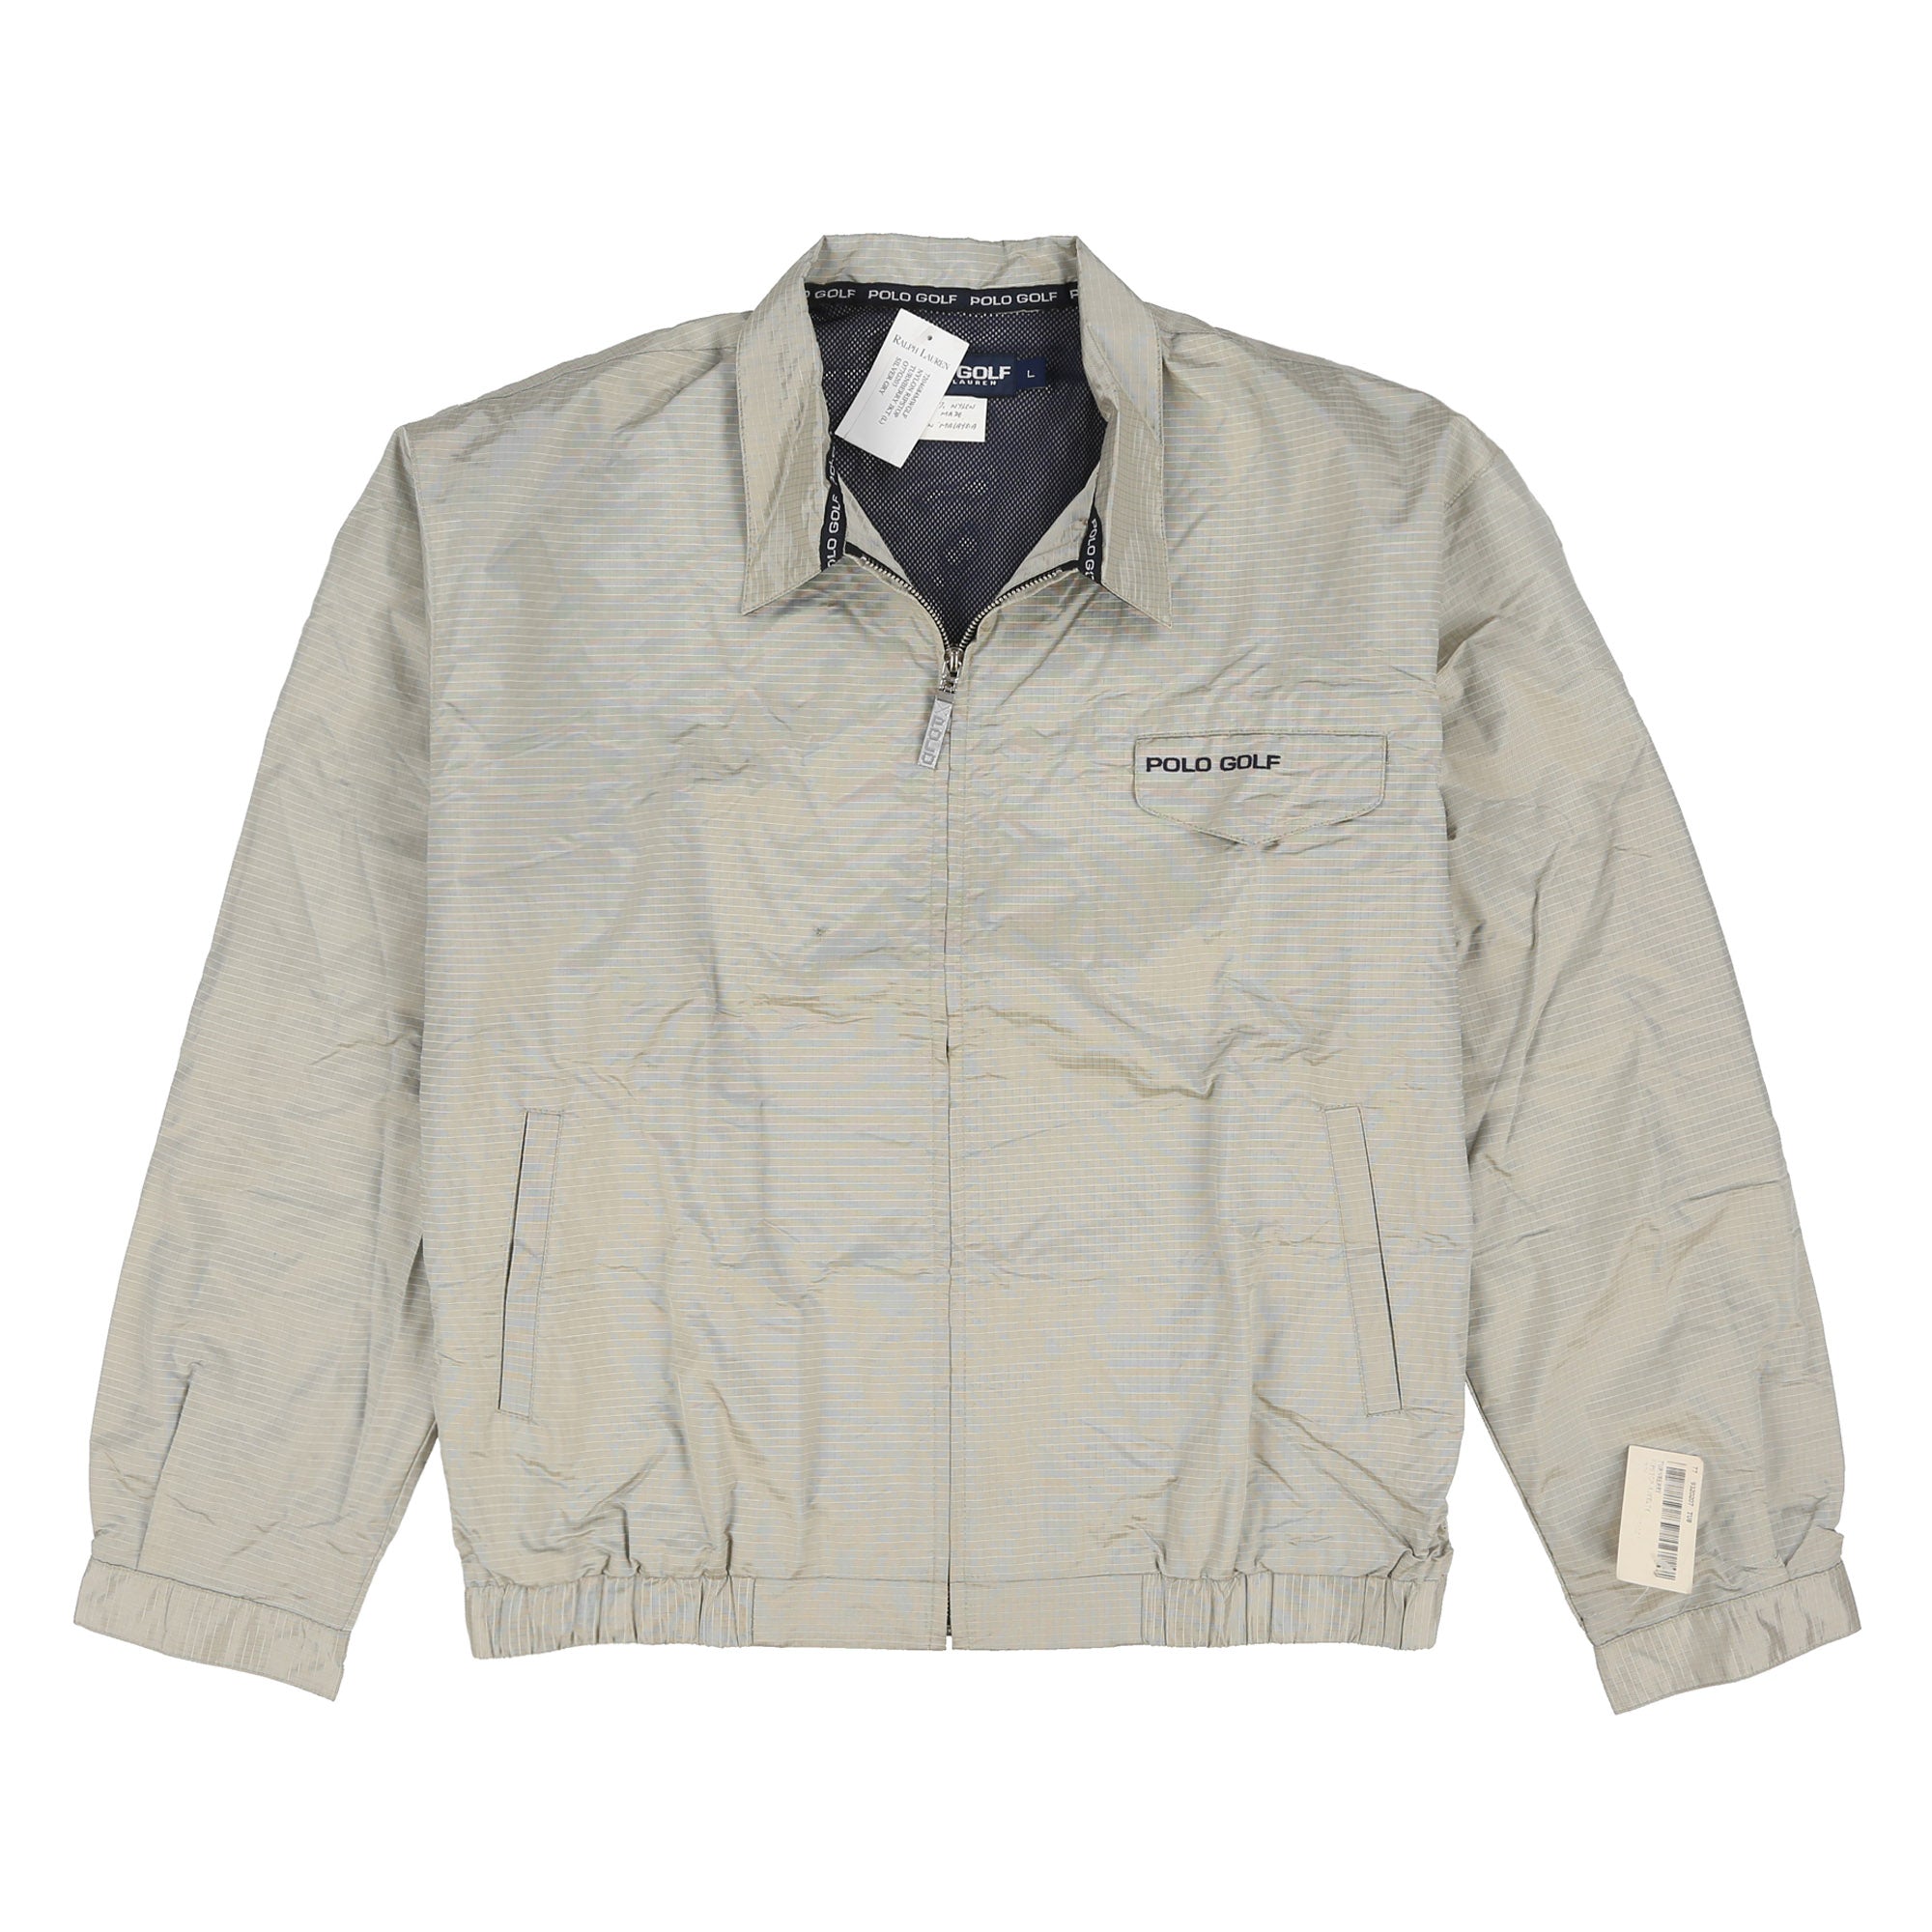 POLO GOLF TURNBERRY JACKET // SILVER GREY